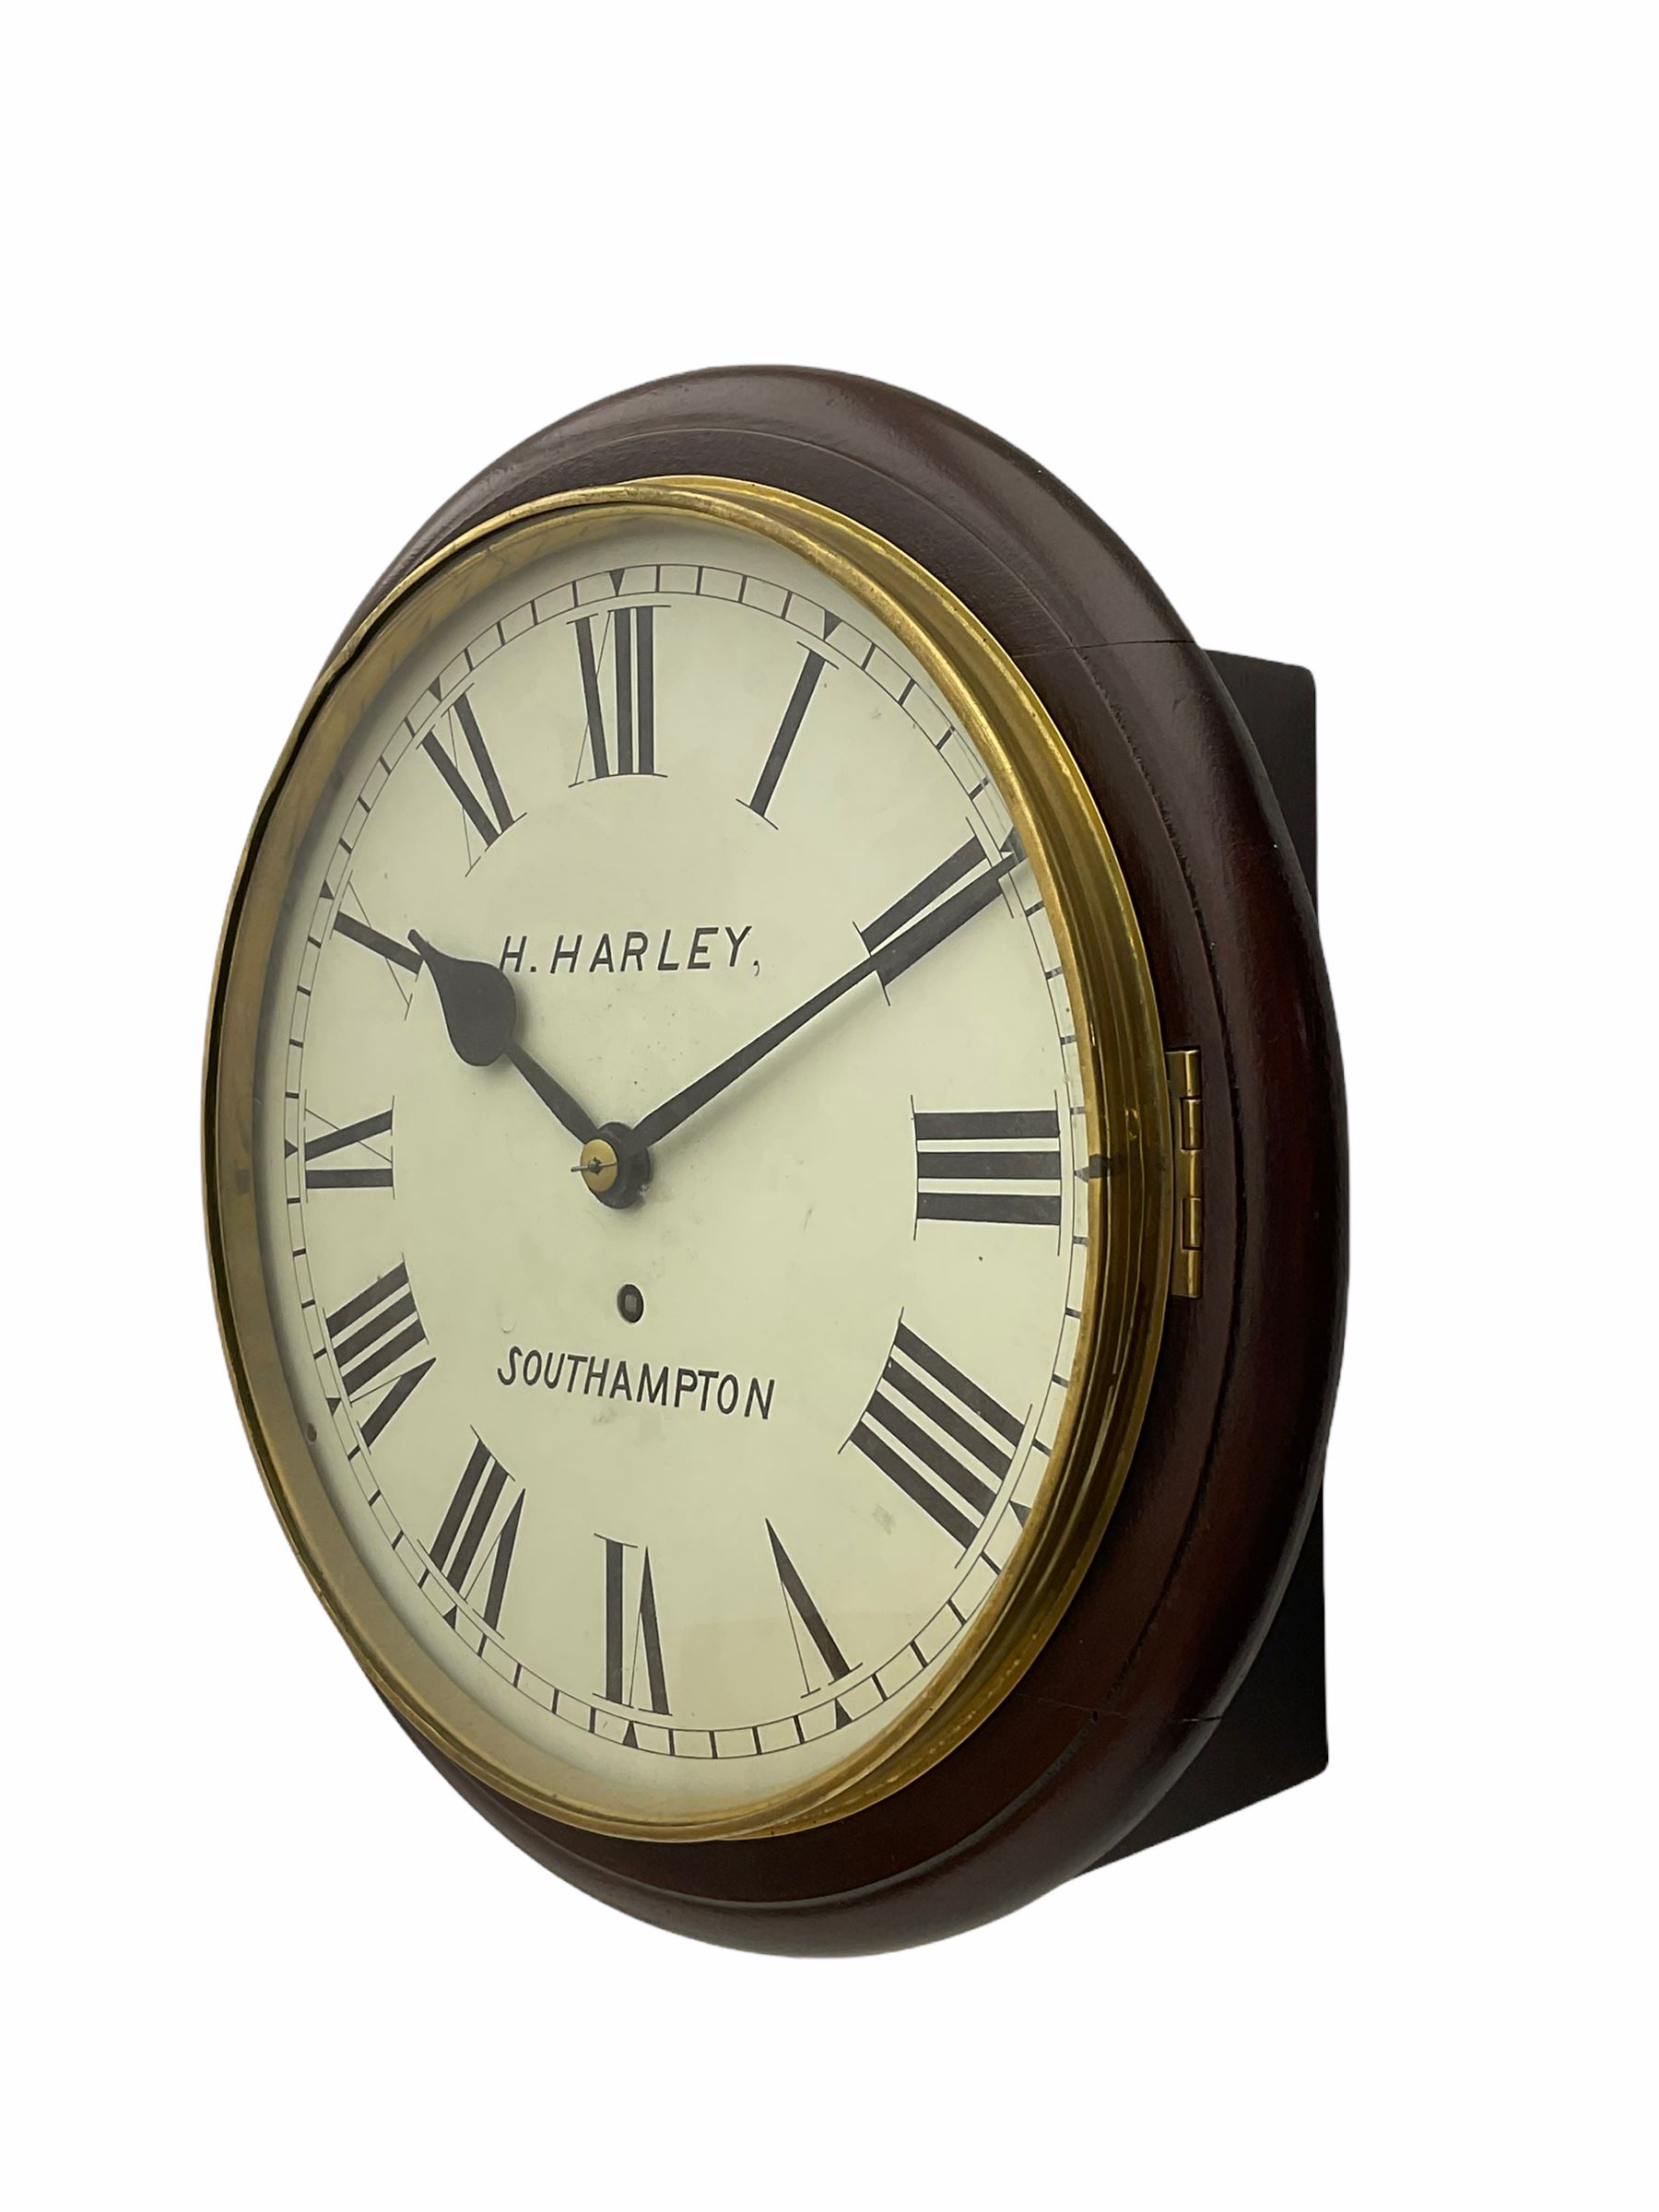 Wall clock with a 12-inch dial and spun brass bezel - Image 2 of 3